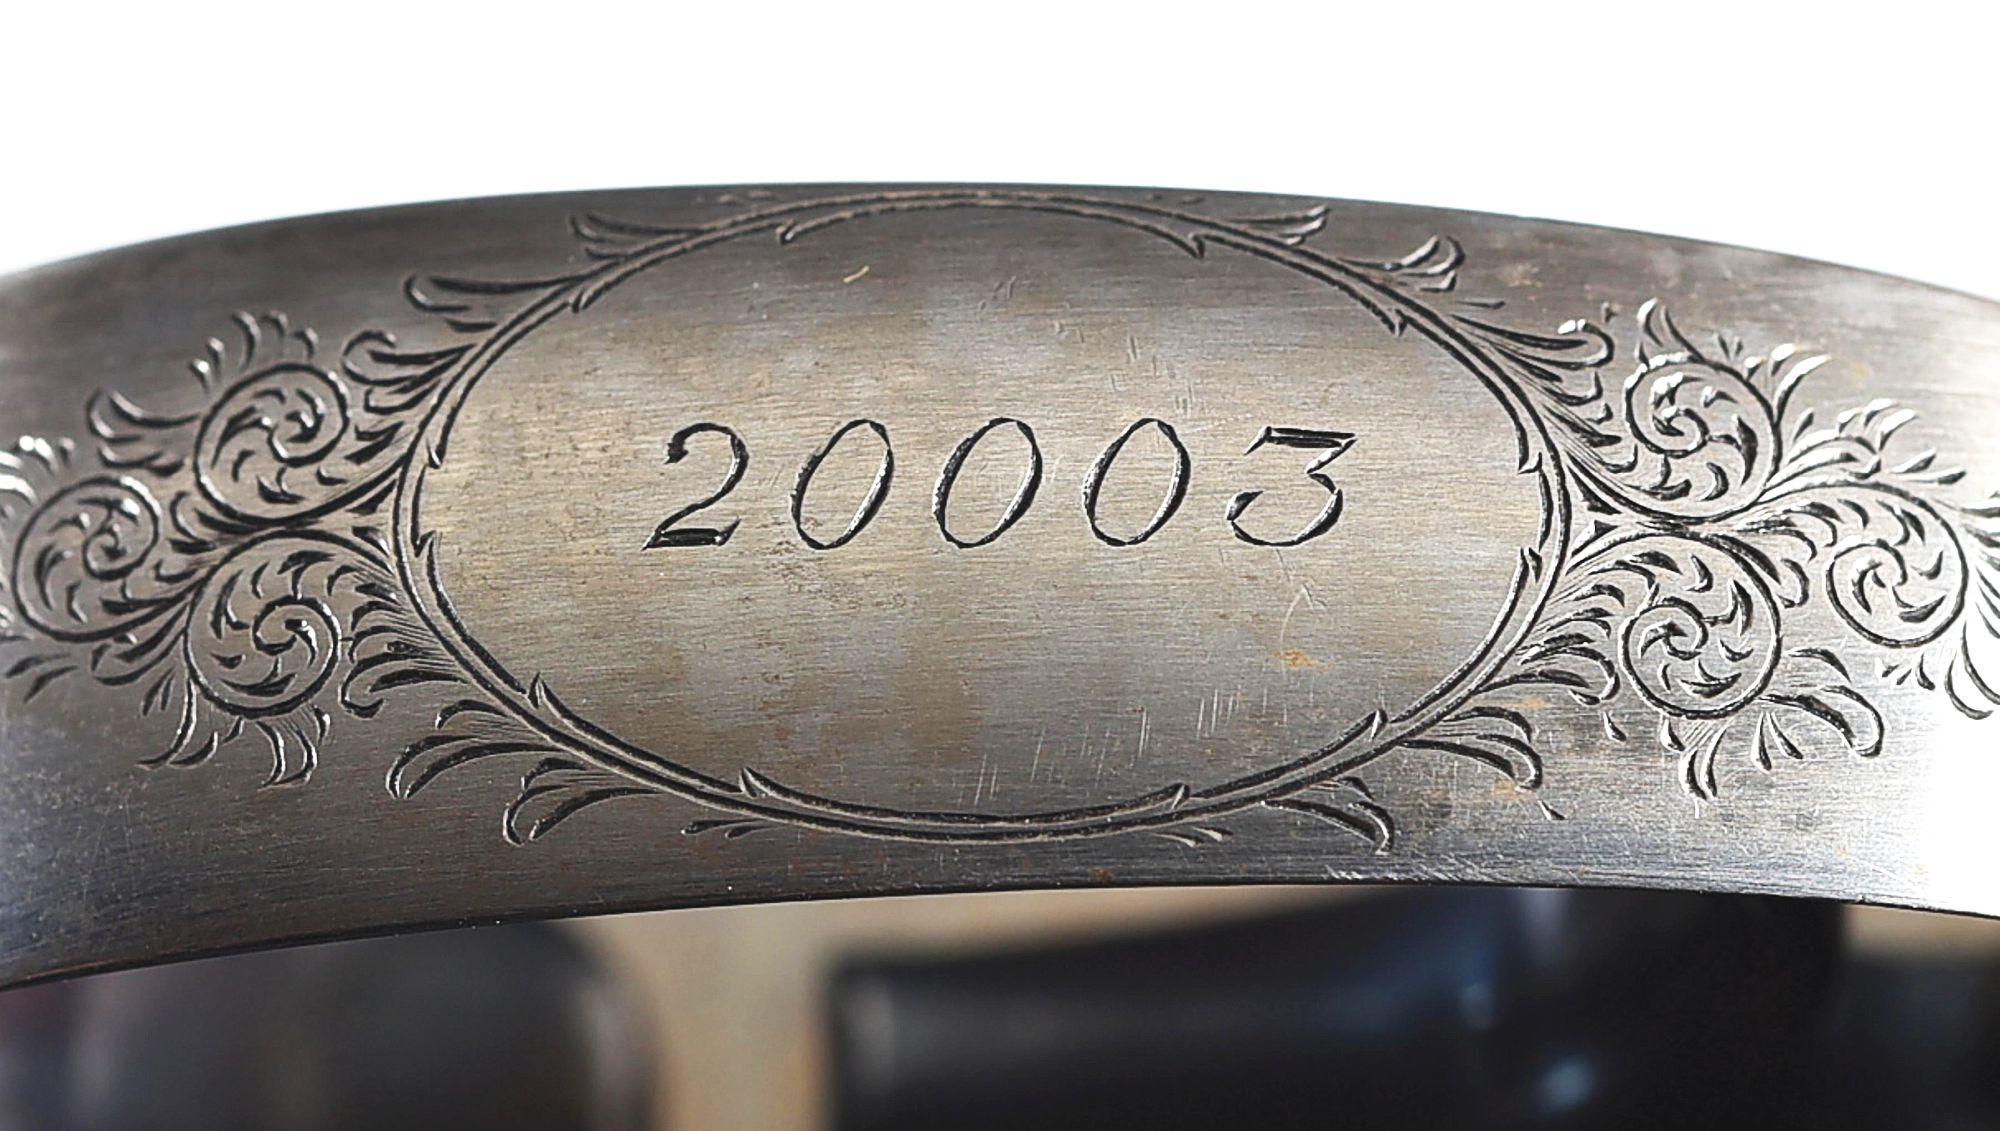 (M) E.J. CHURCHILL IMPERIAL 20 GAUGE OVER/UNDER SHOTGUN WITH ENGRAVING BY POWELL.